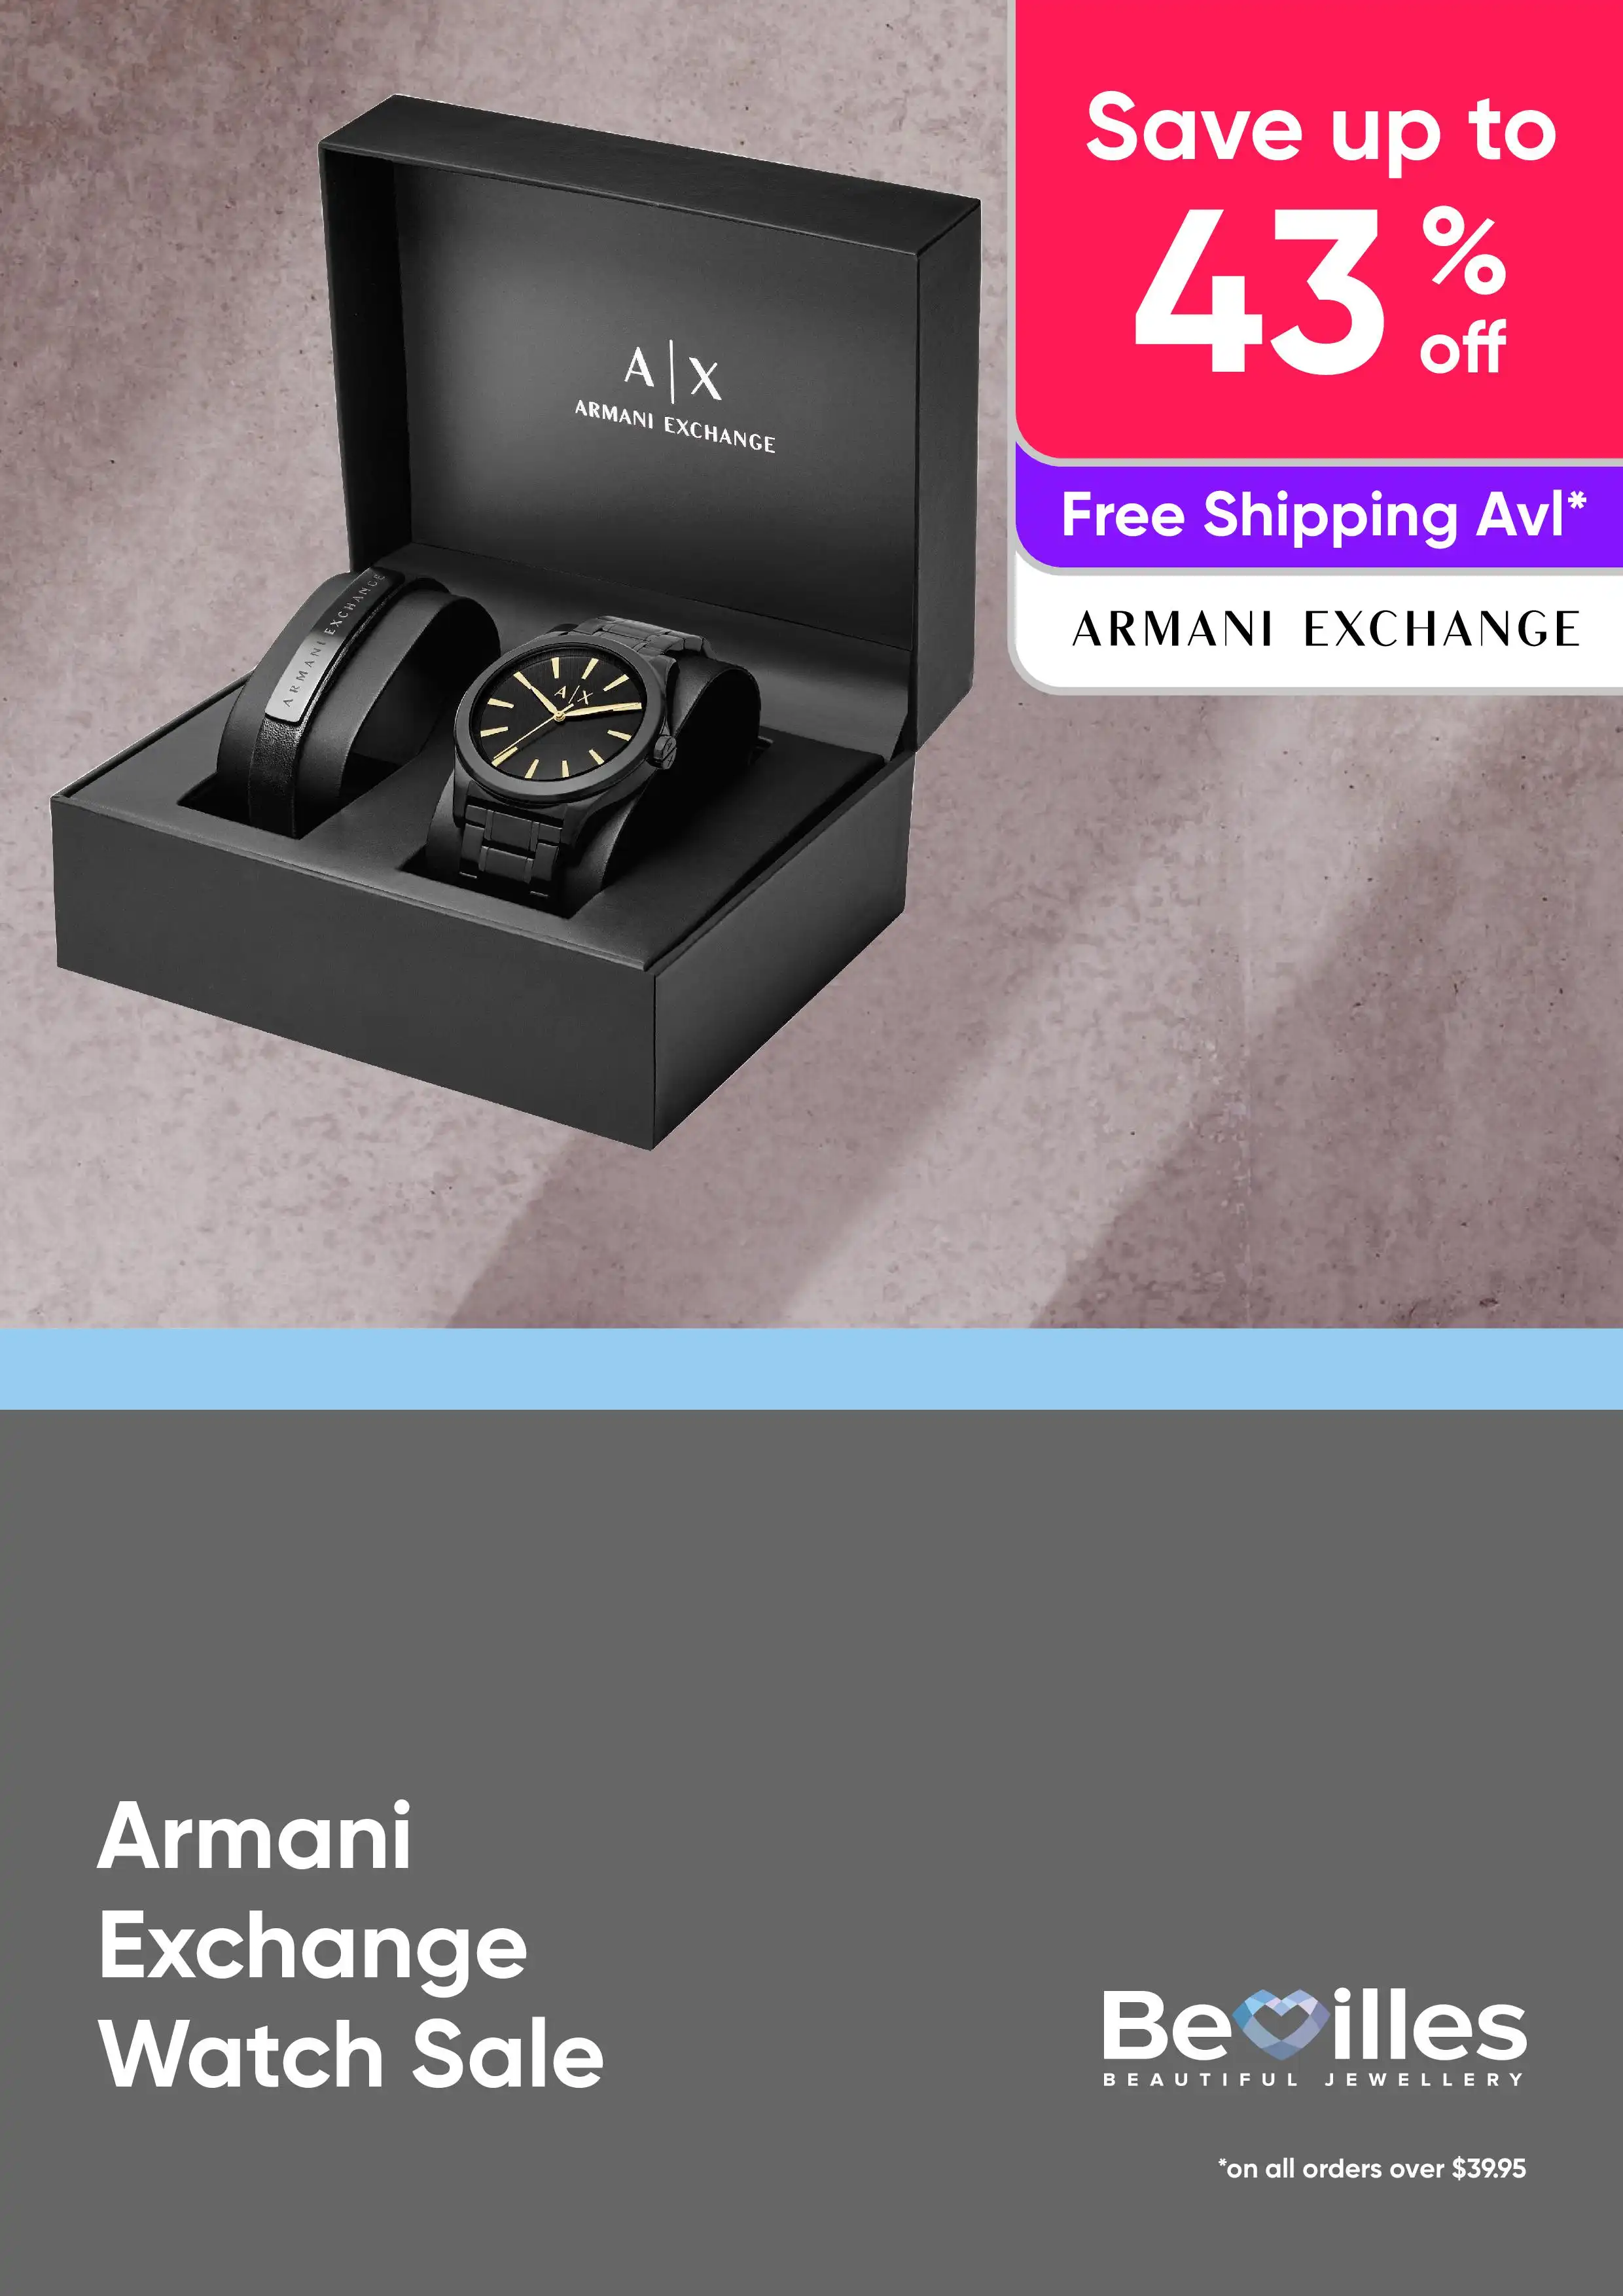 Armani Exchange Watch Sale - up to 43% off